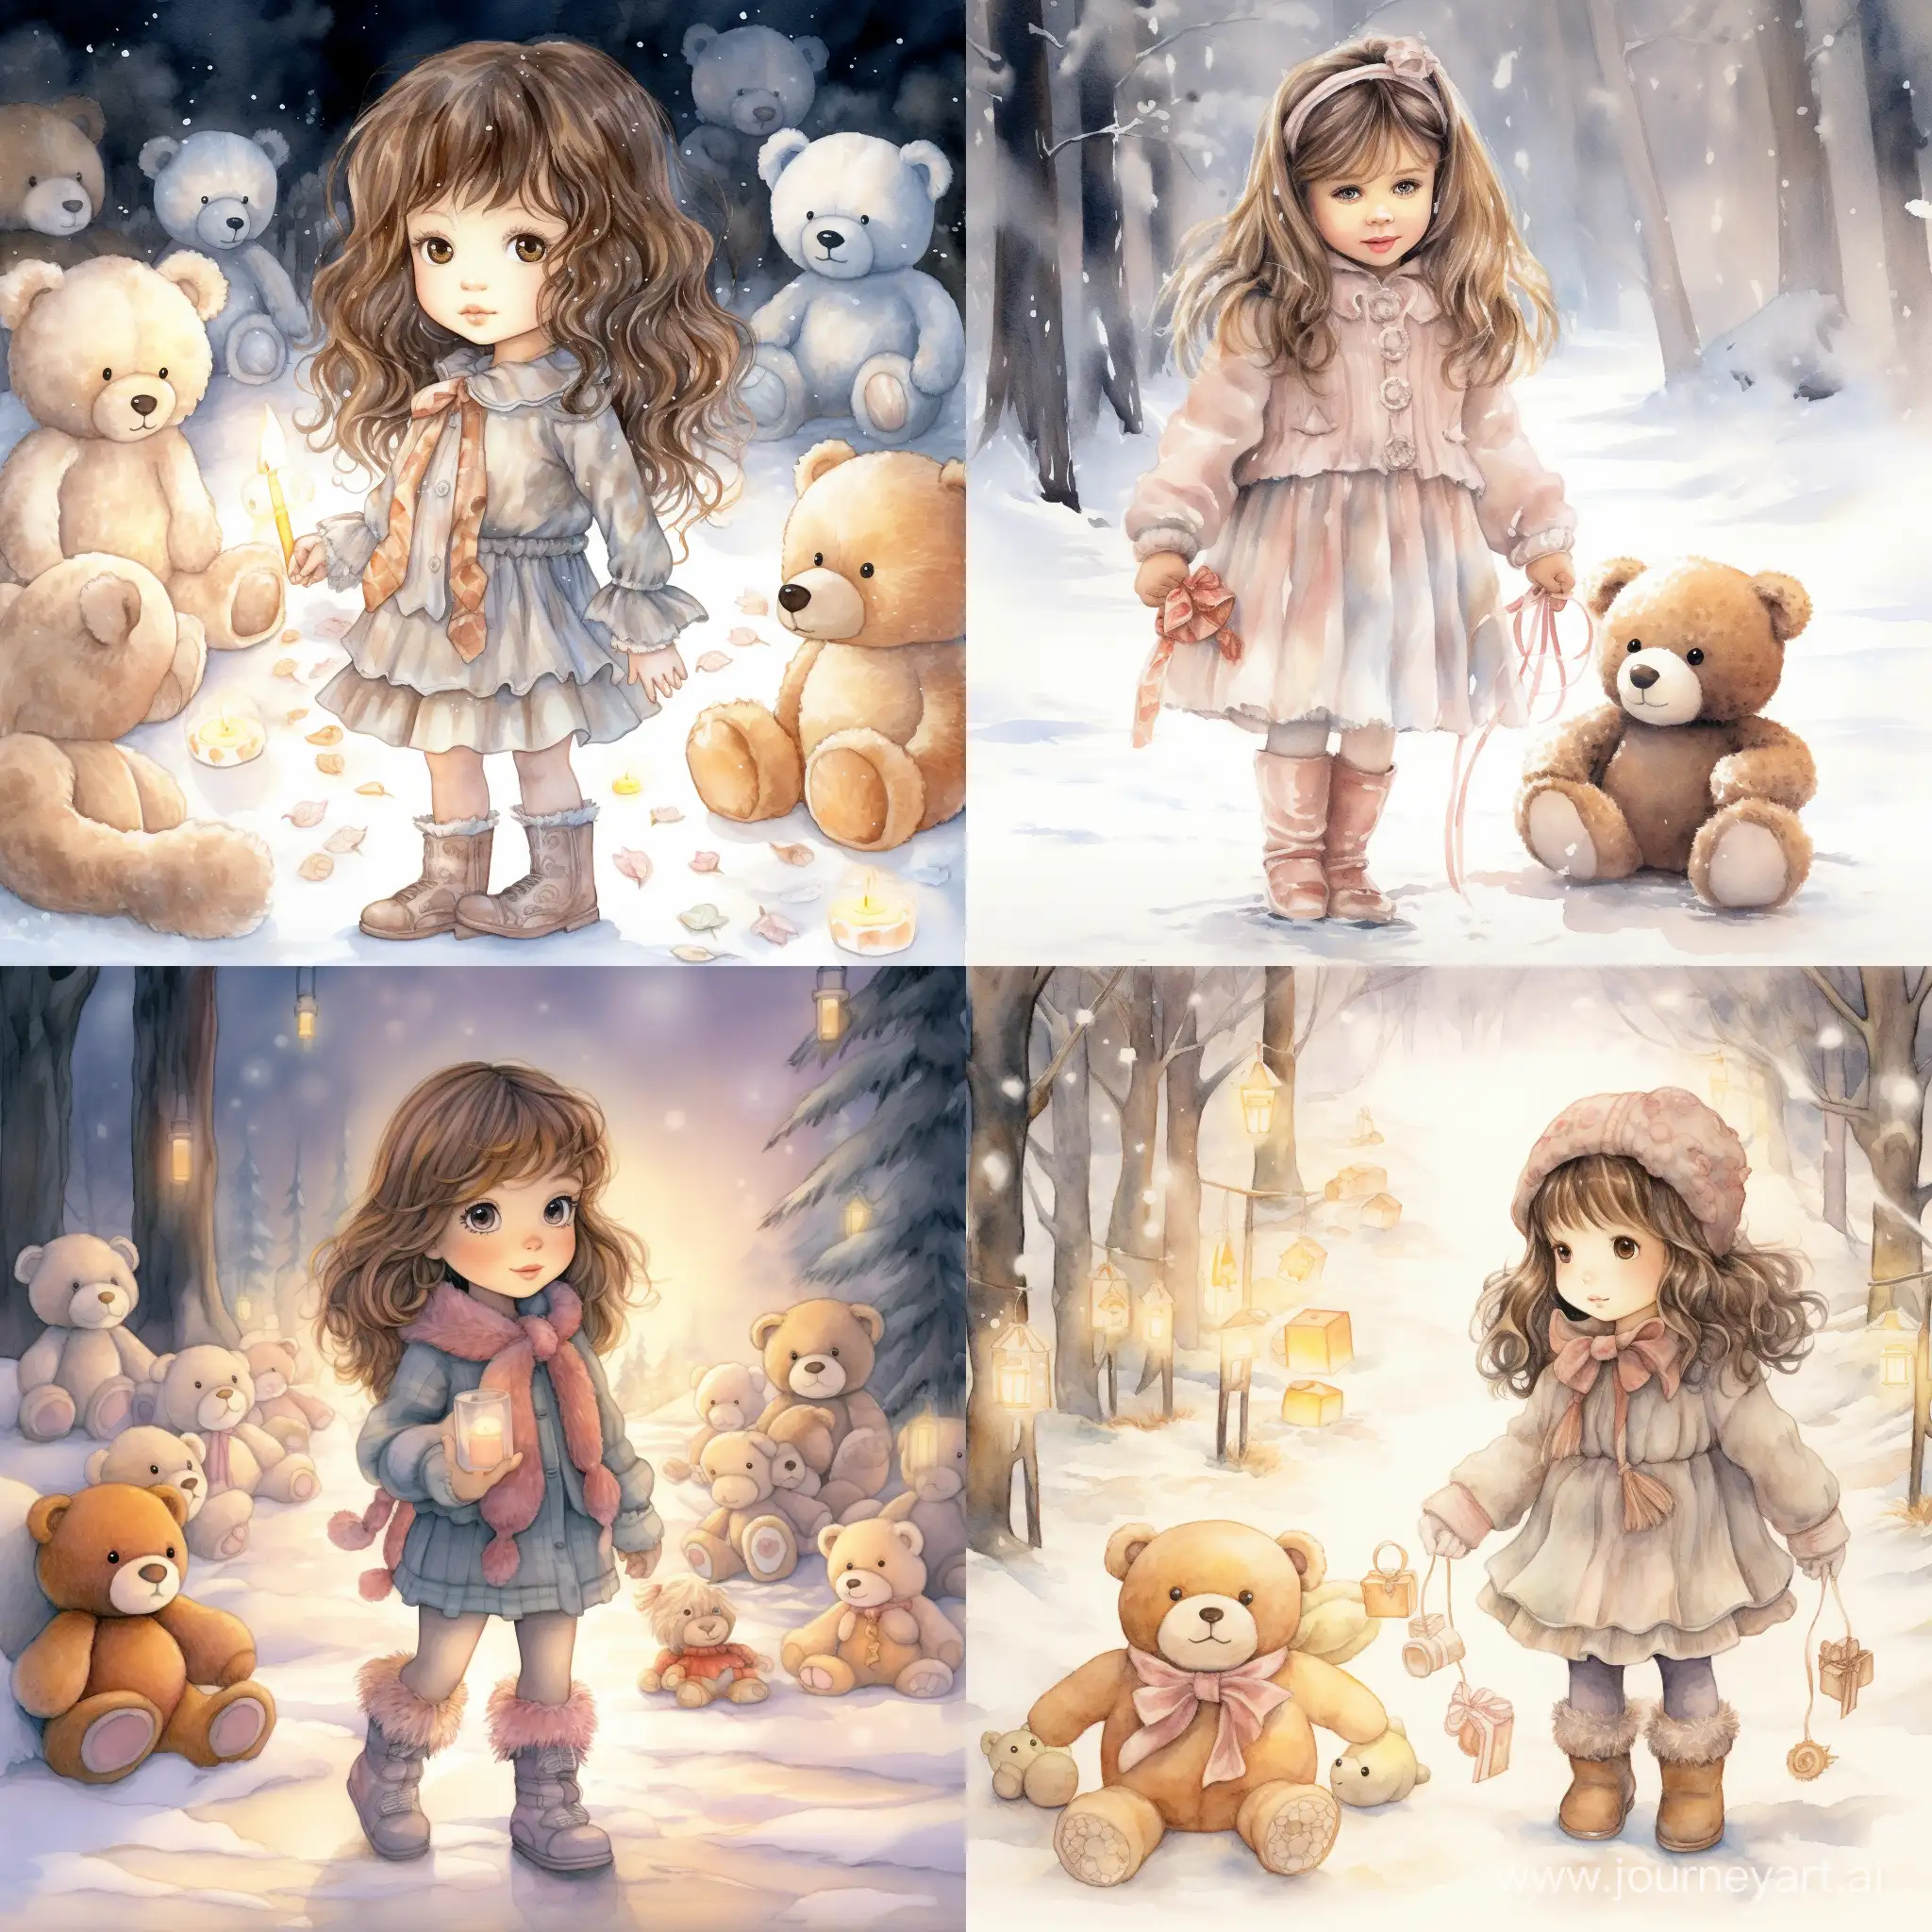 Enchanting-Winter-Stroll-ThreeYearOld-Girl-with-Teddy-Bear-Amidst-New-Years-Lights-and-Gifts